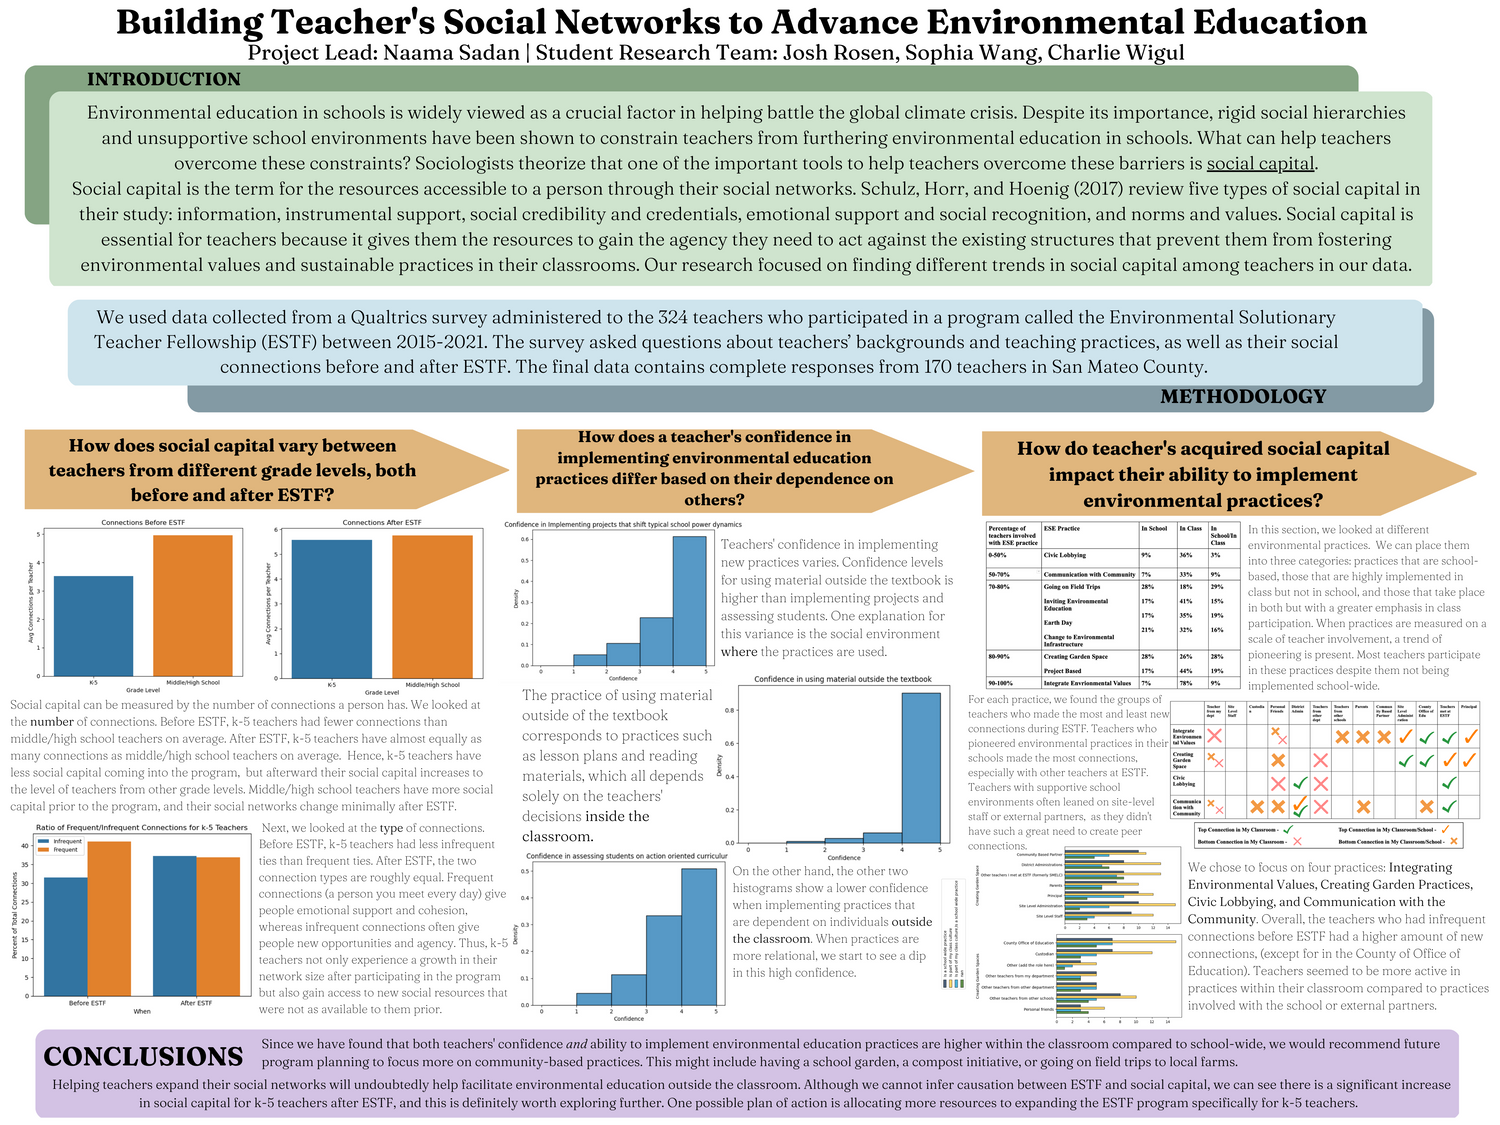 Building Teacher's Social Networks to Advance Environmental Education - Spring 2023 Discovery Project